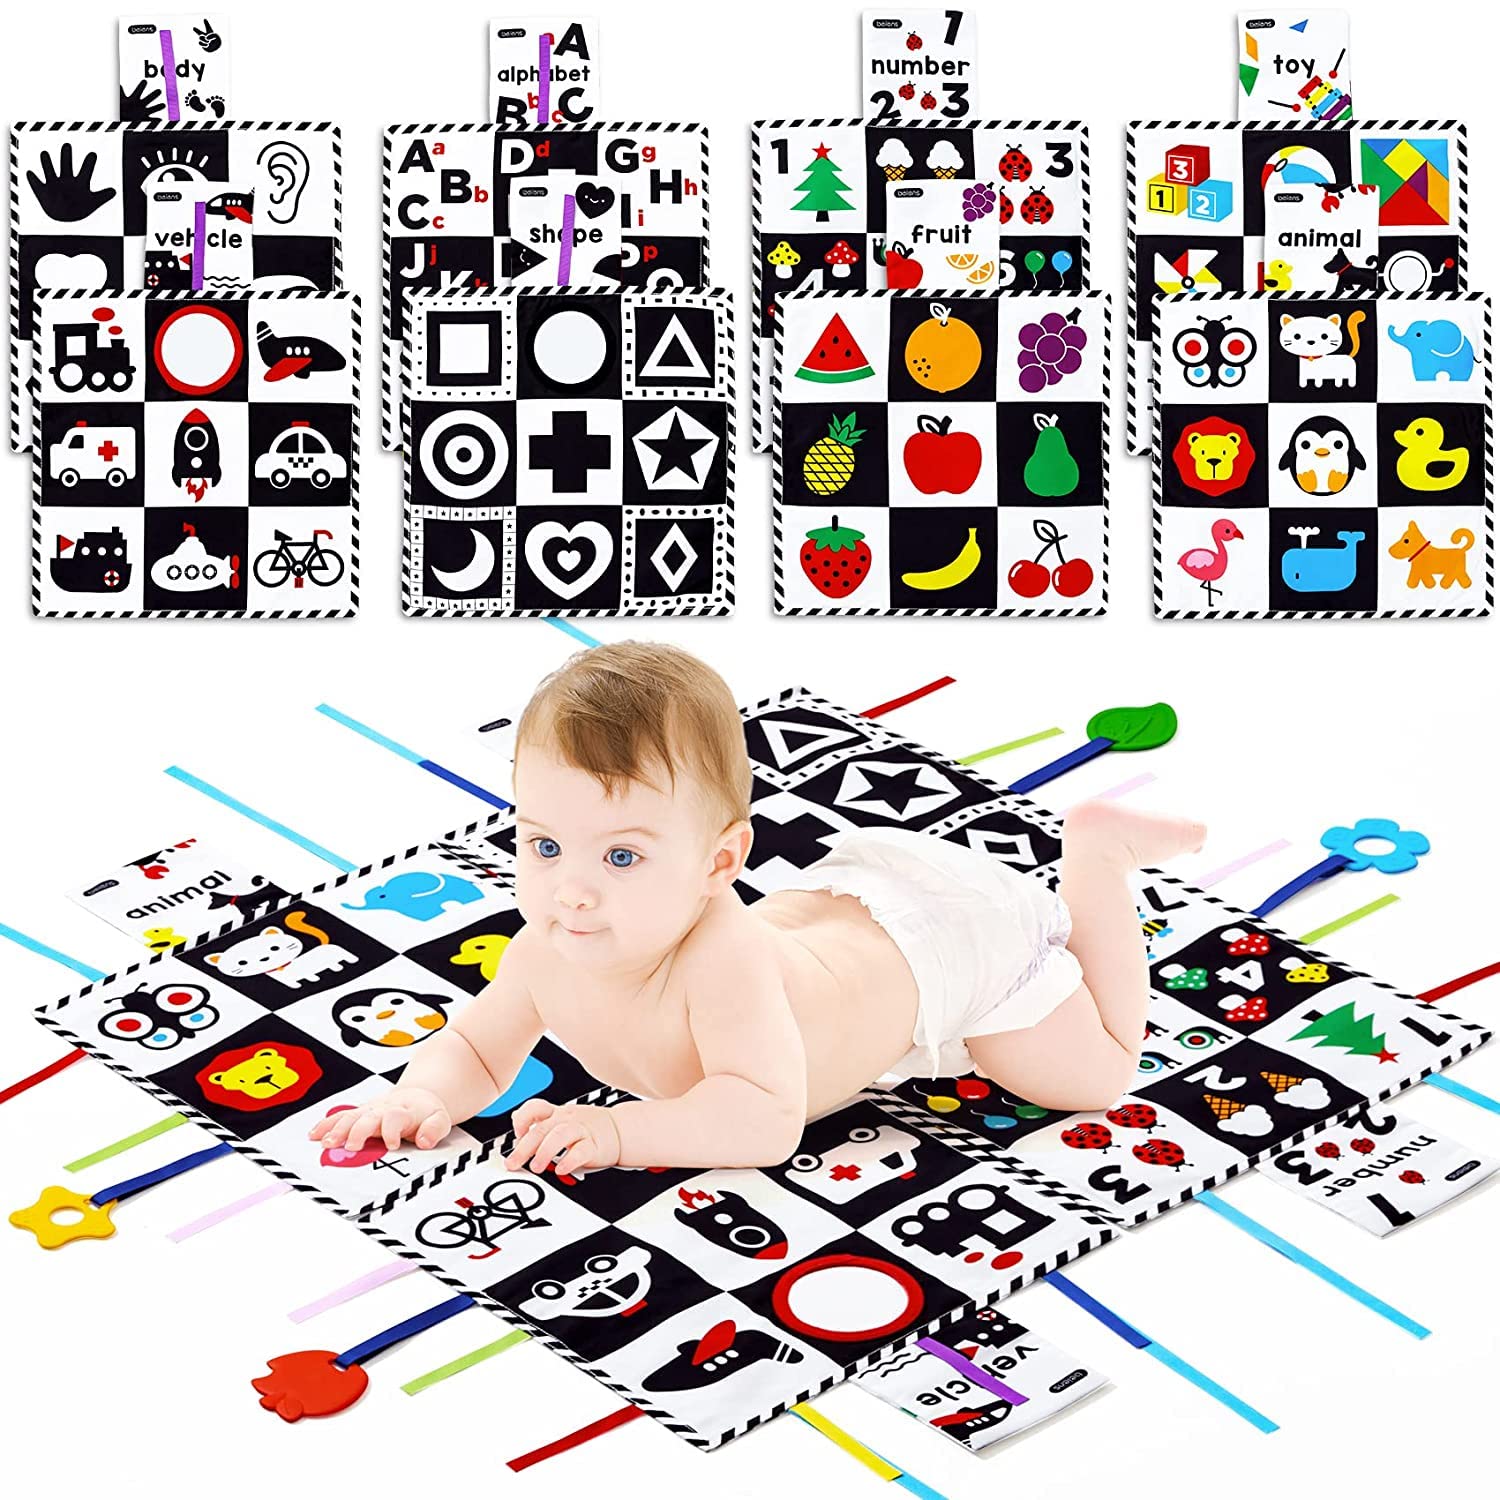 beiens Baby Toys 0-6 Months Tummy Time Crinkle Toys with Mirror Black and  White High